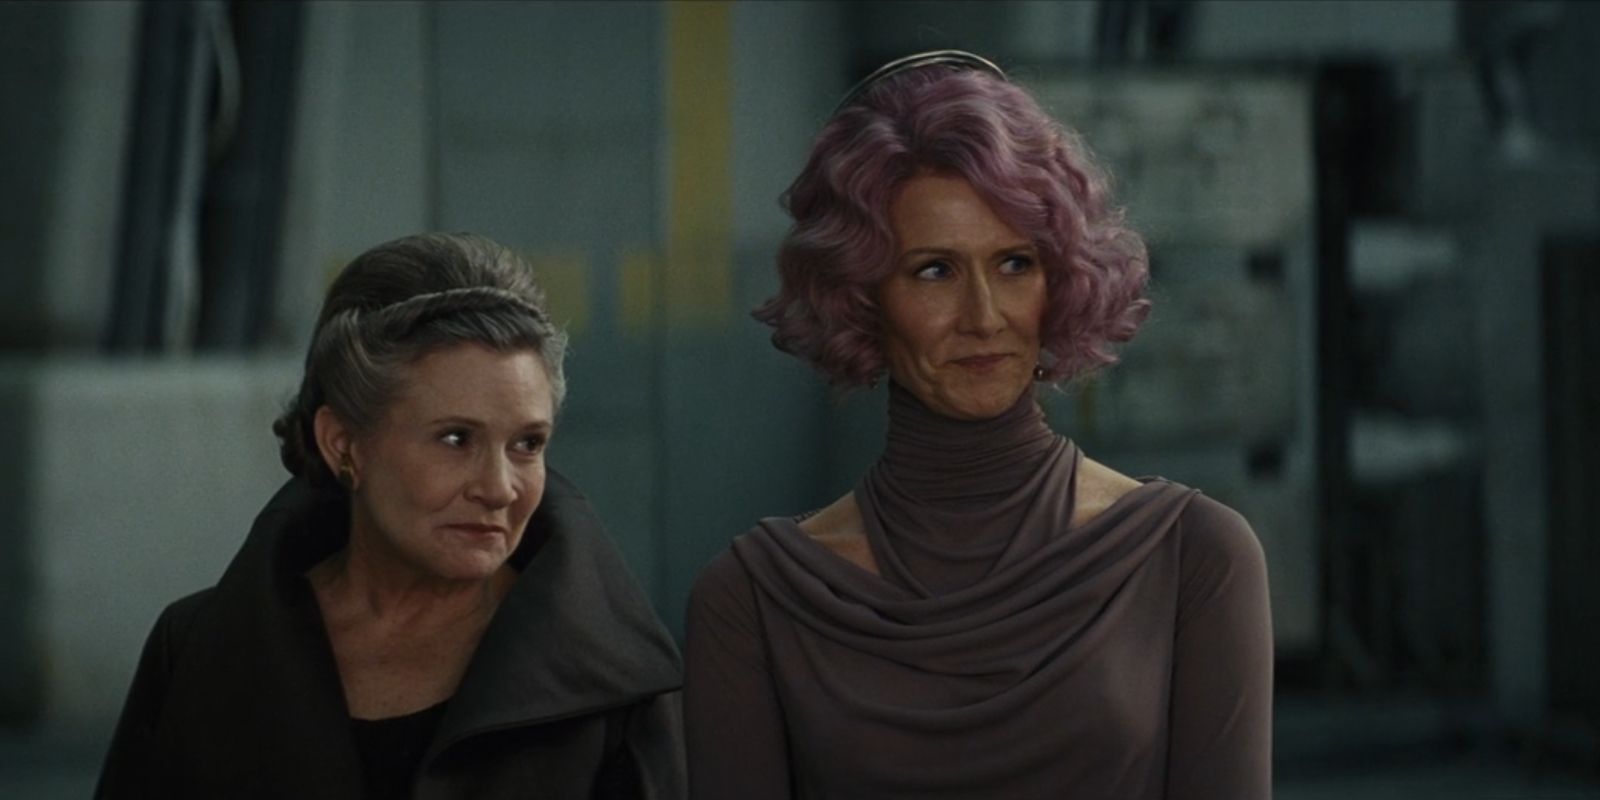 General Leia Organa and Admiral Amilyn Holdo in Star Wars The Last Jedi